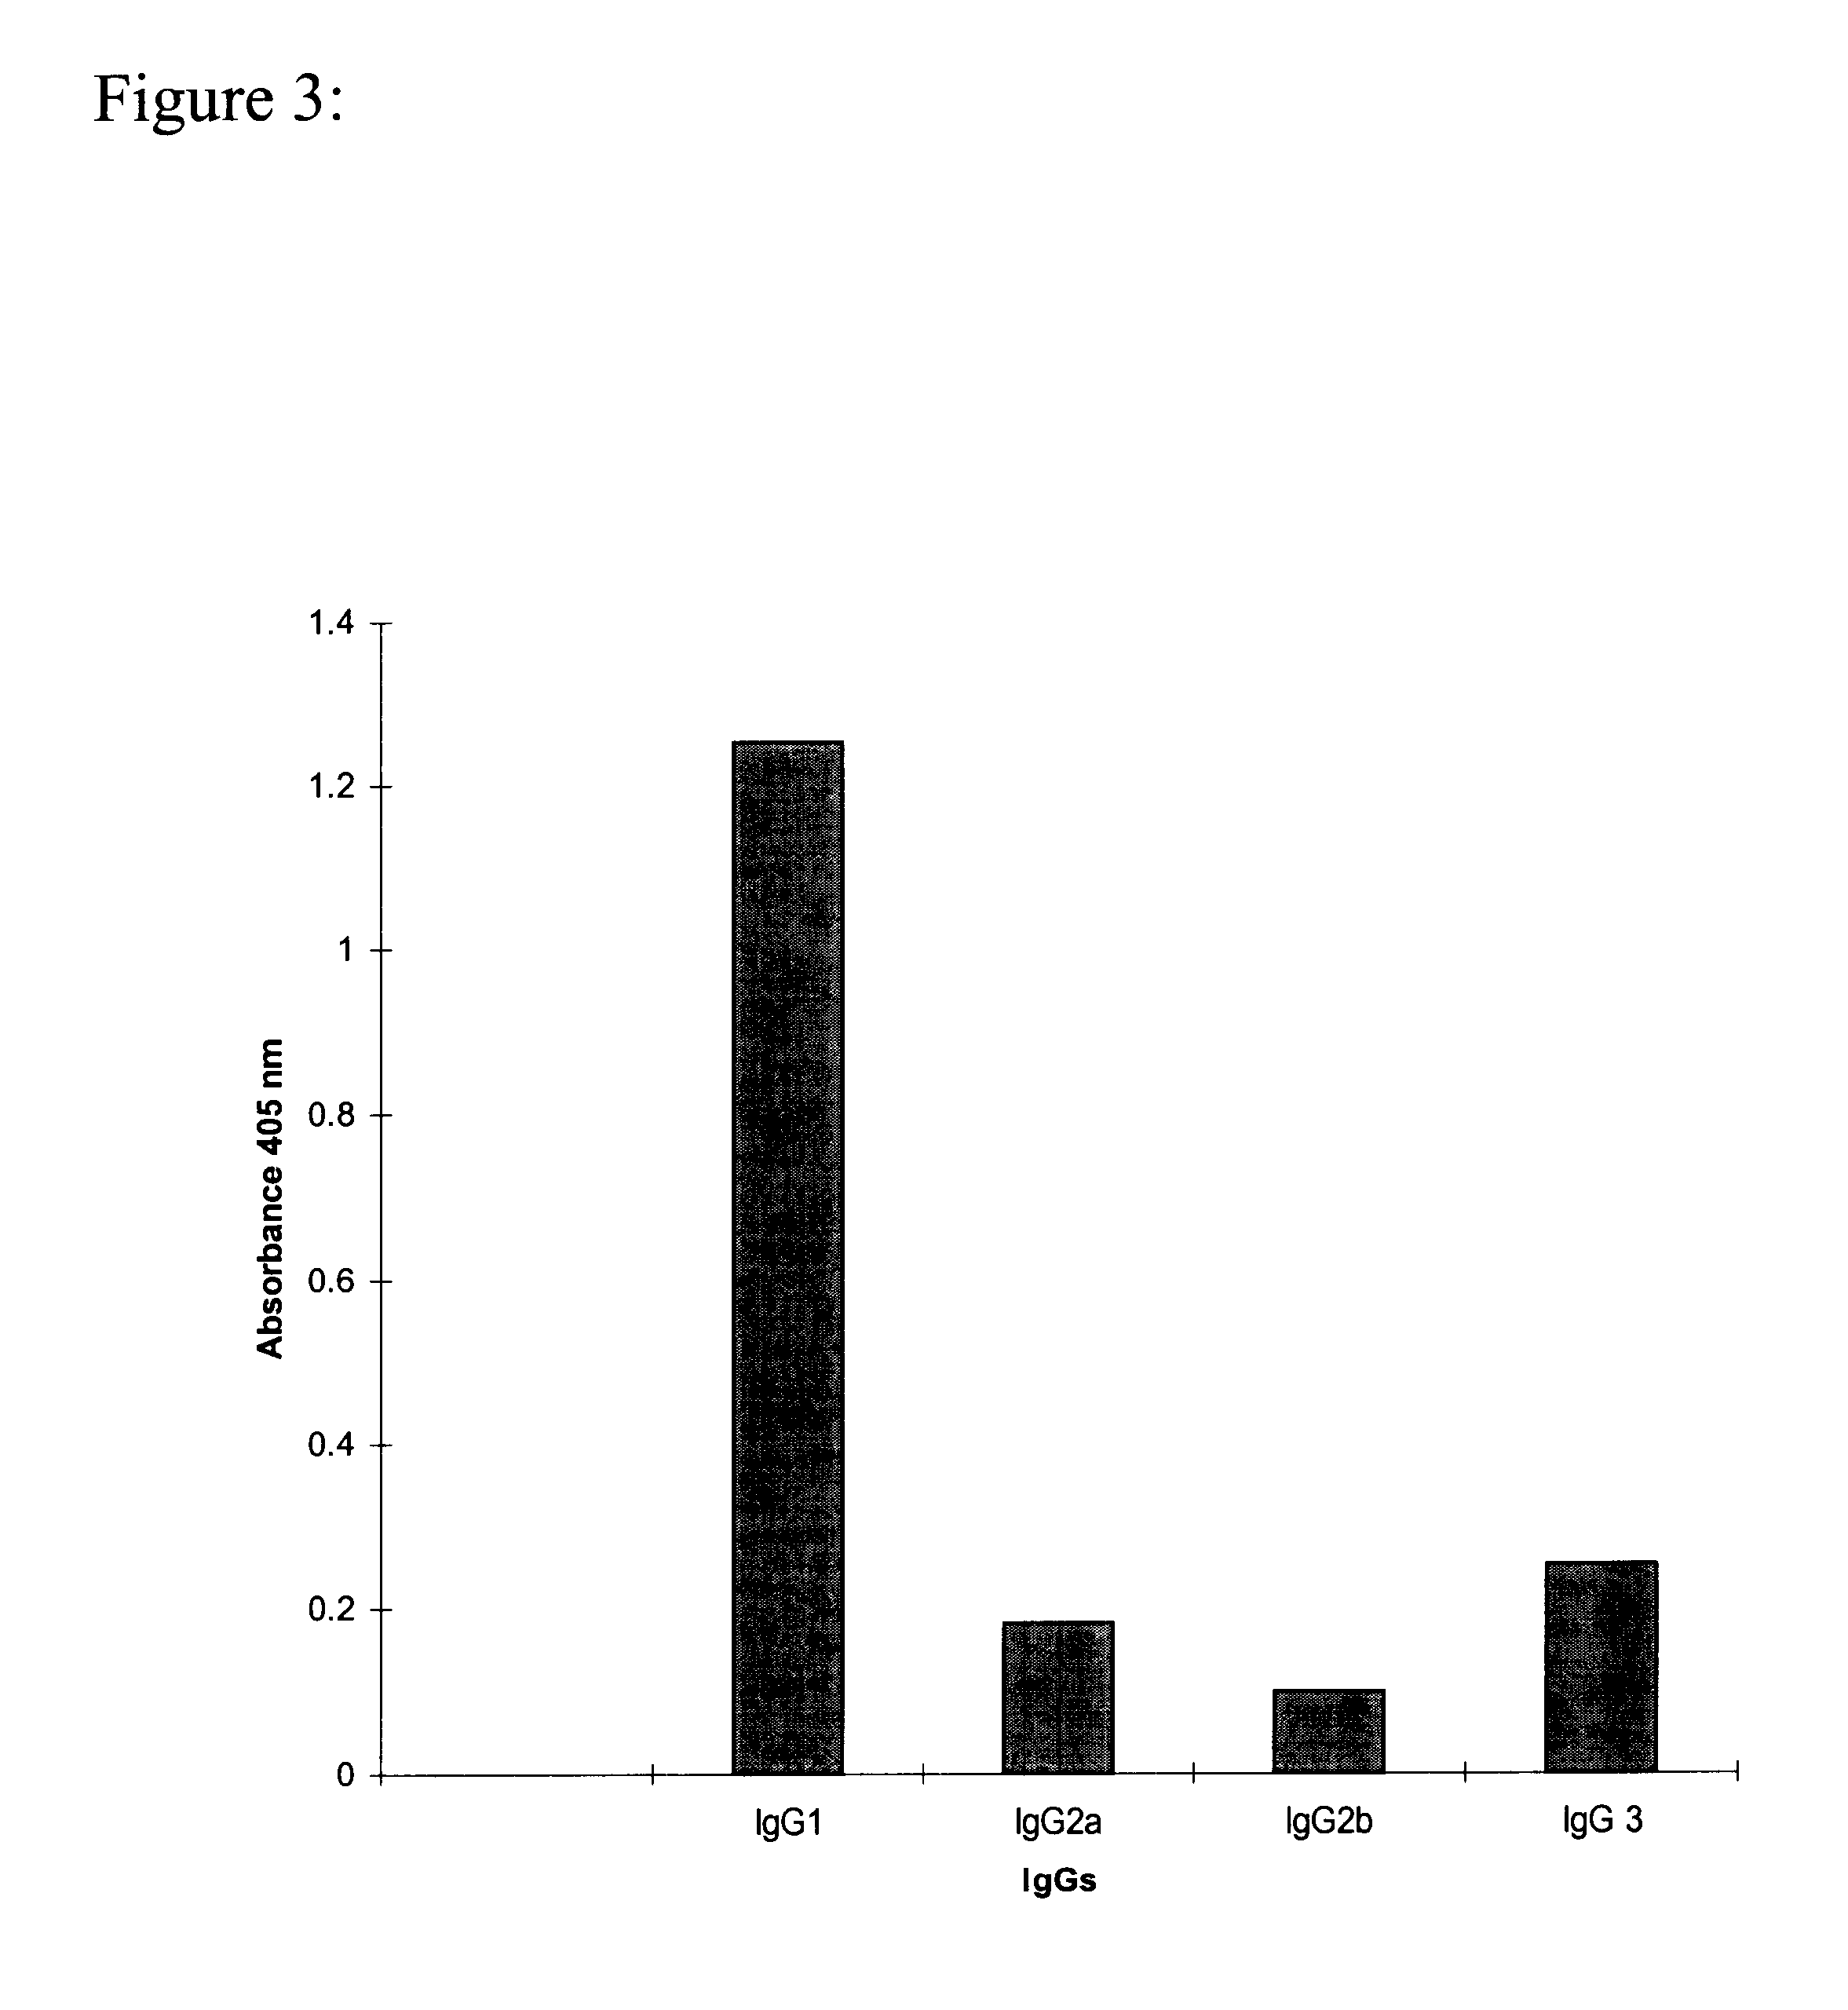 Monoclonal antibody which recognizes the oligosaccharide N-glycolylated-galactose-glucose sialic acid in malignant tumors, and composition containing it